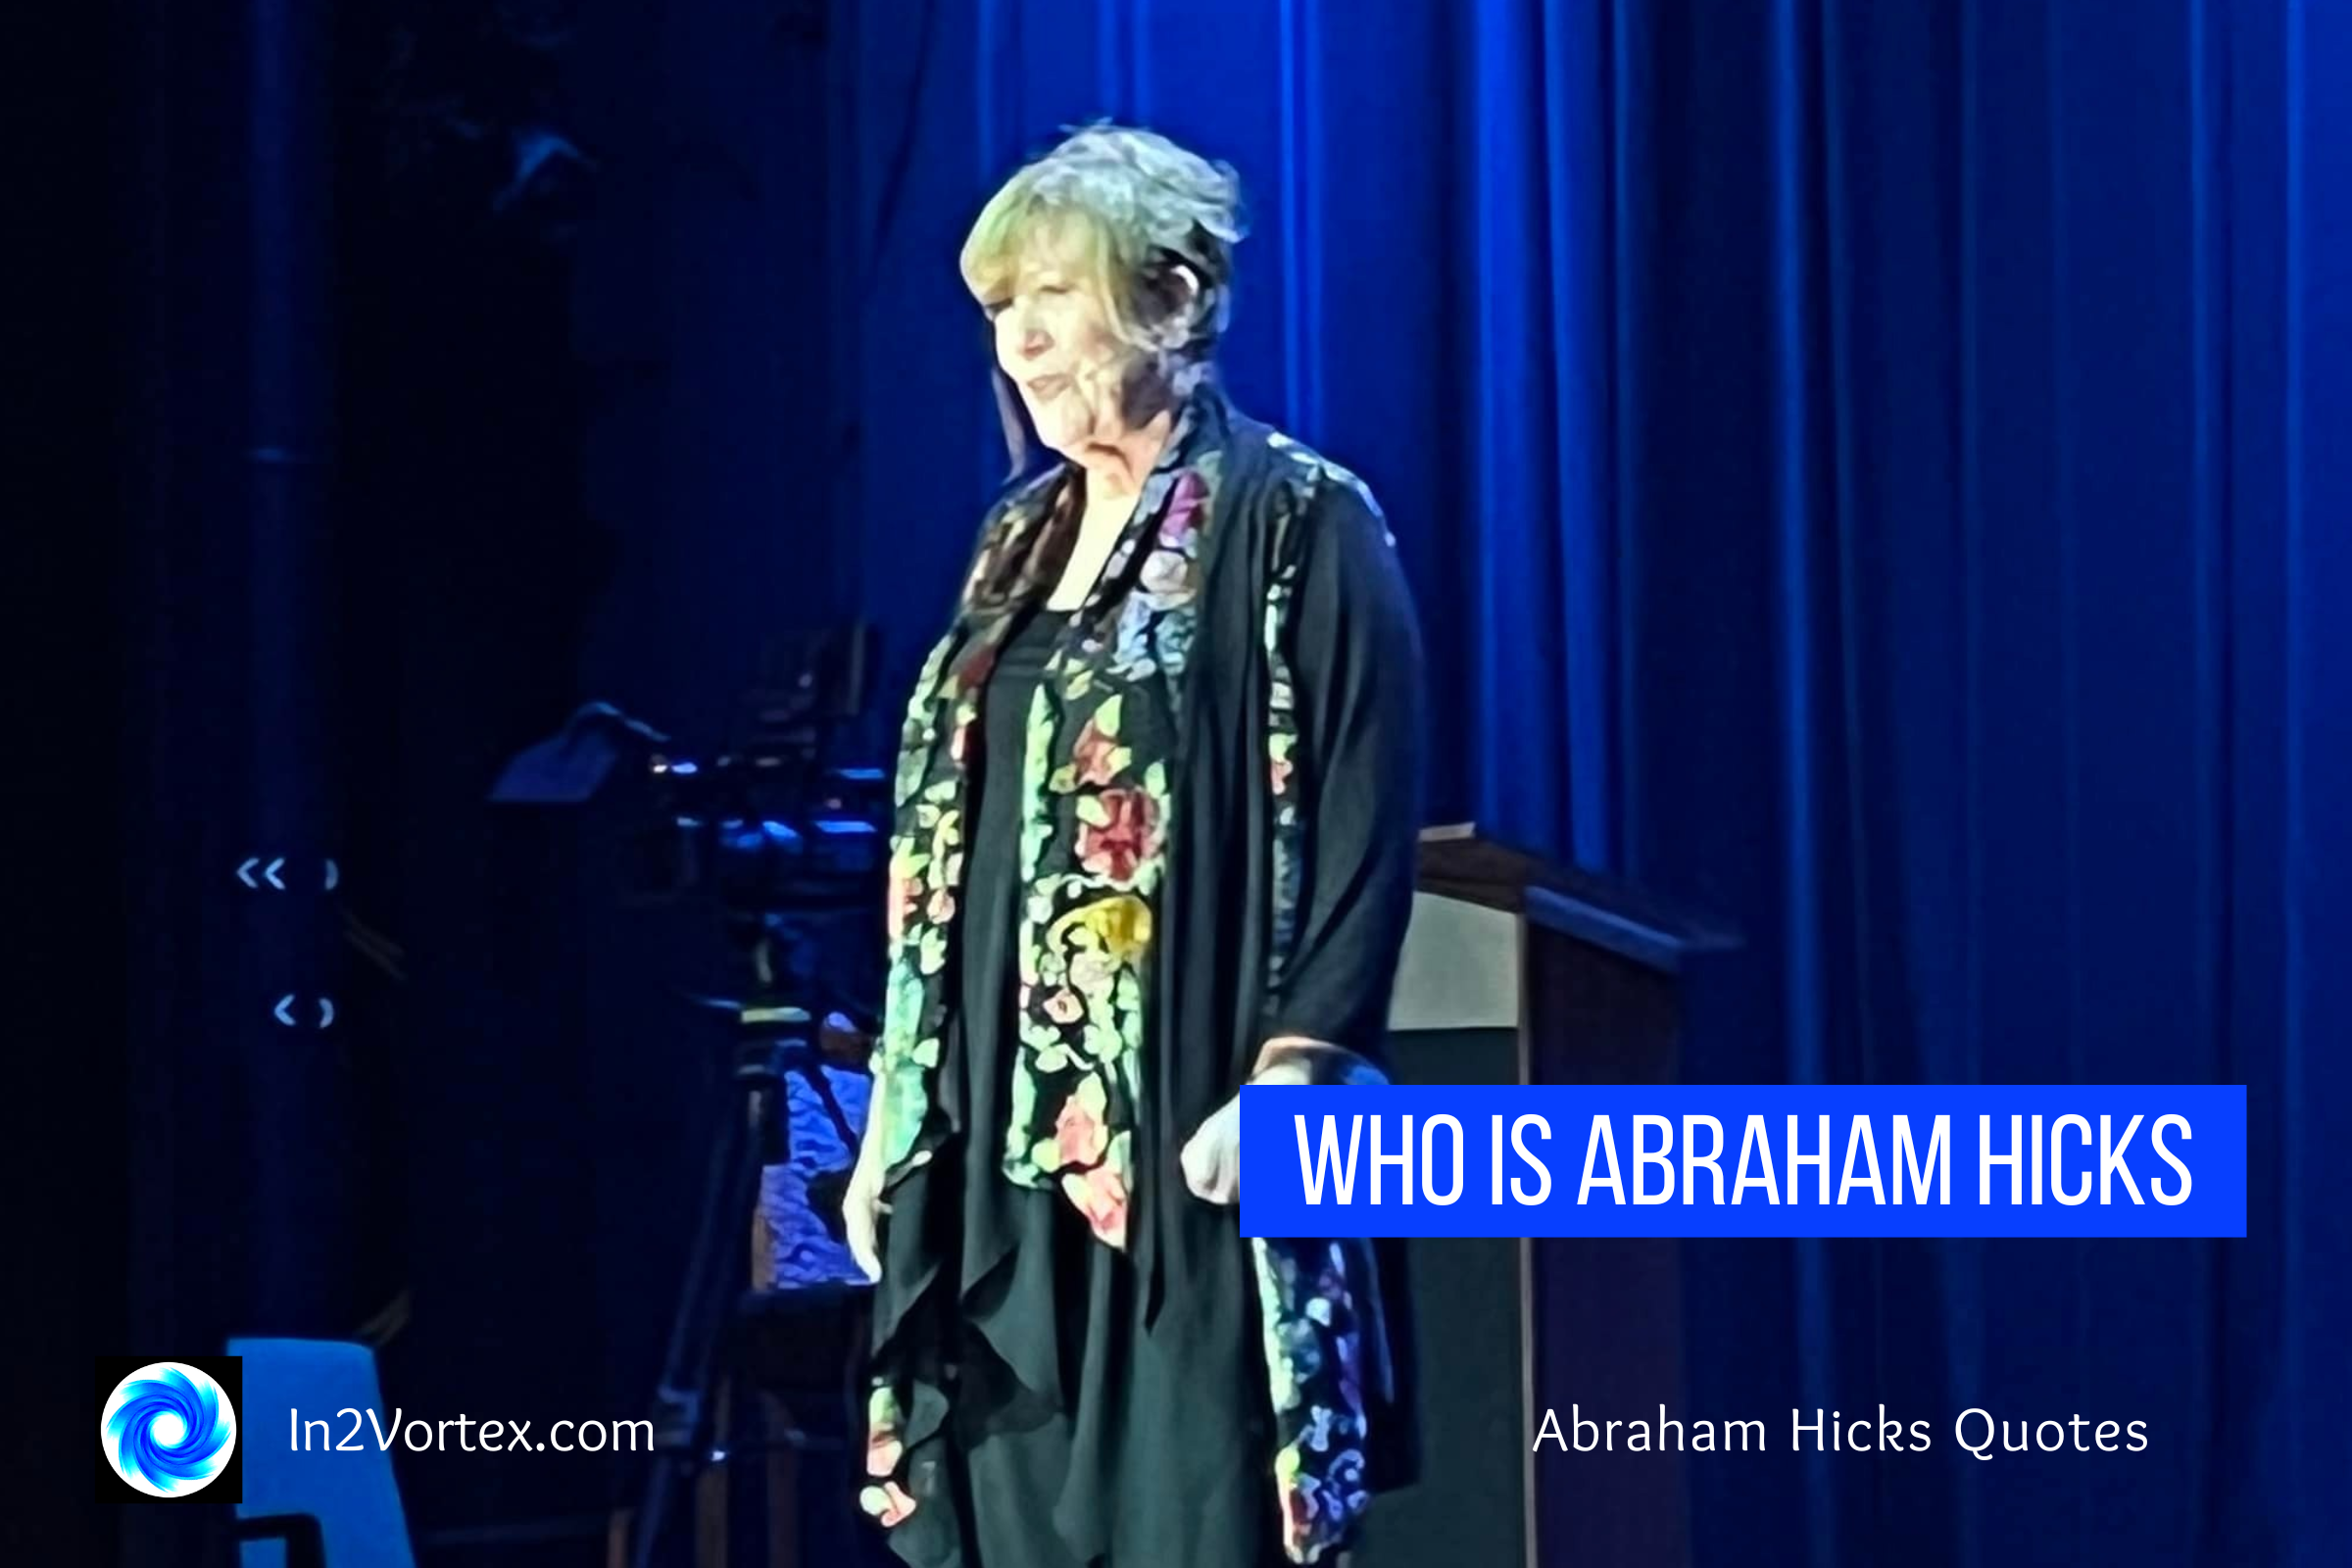 Who is Abraham Hicks?, abraham hicks quotes, esther hicks, law of attraction, in2vortex,In2Vortex.com